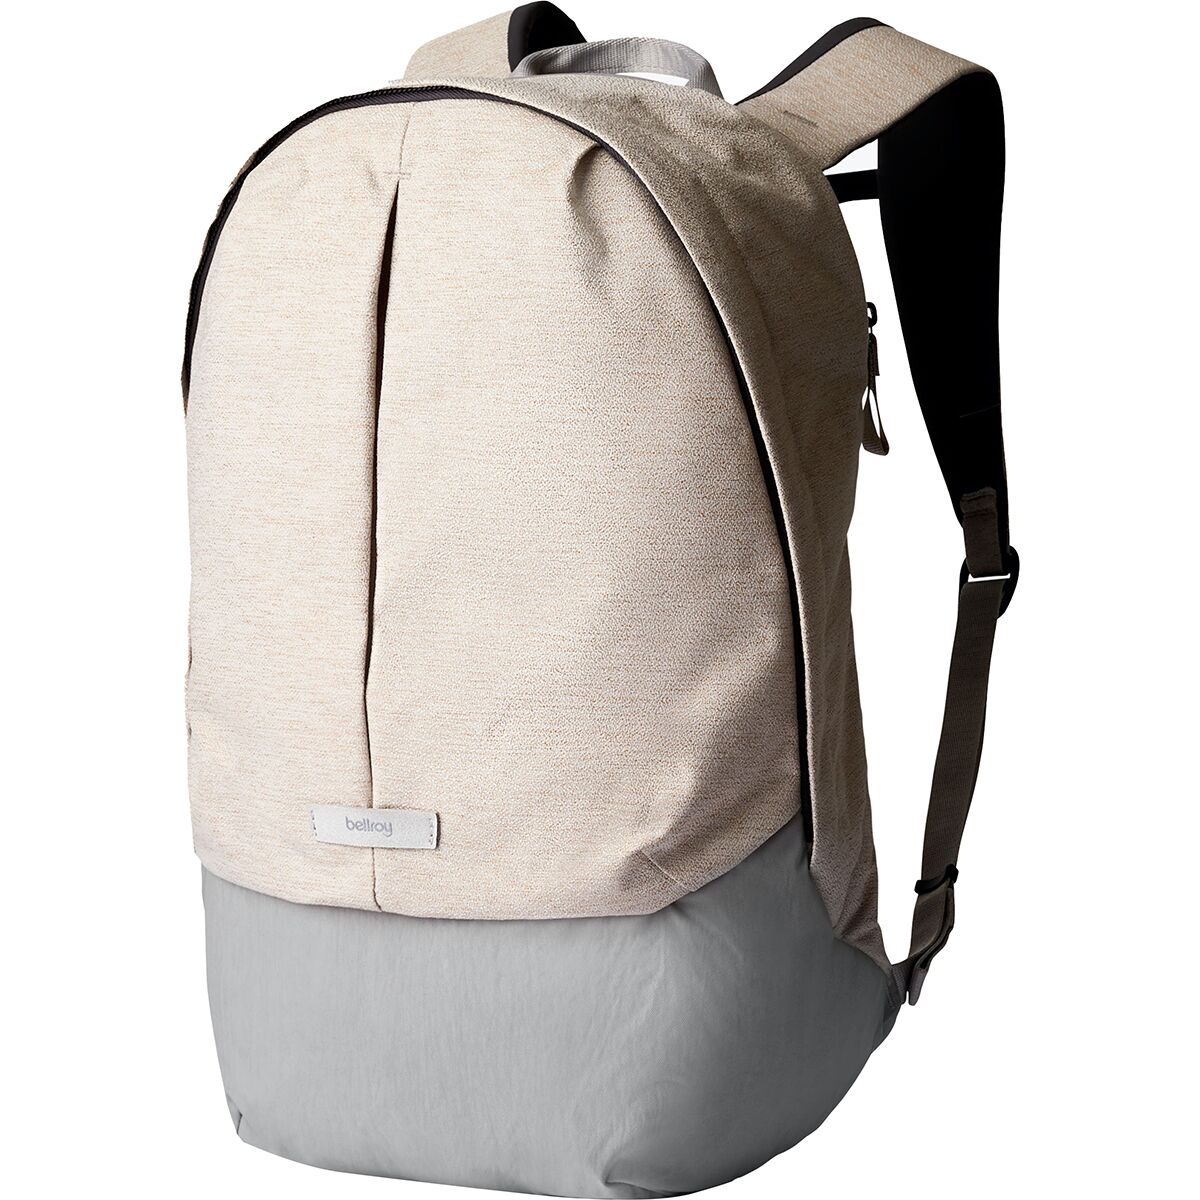 Photos - Backpack Bellroy Classic+ 2nd Edition 24L  